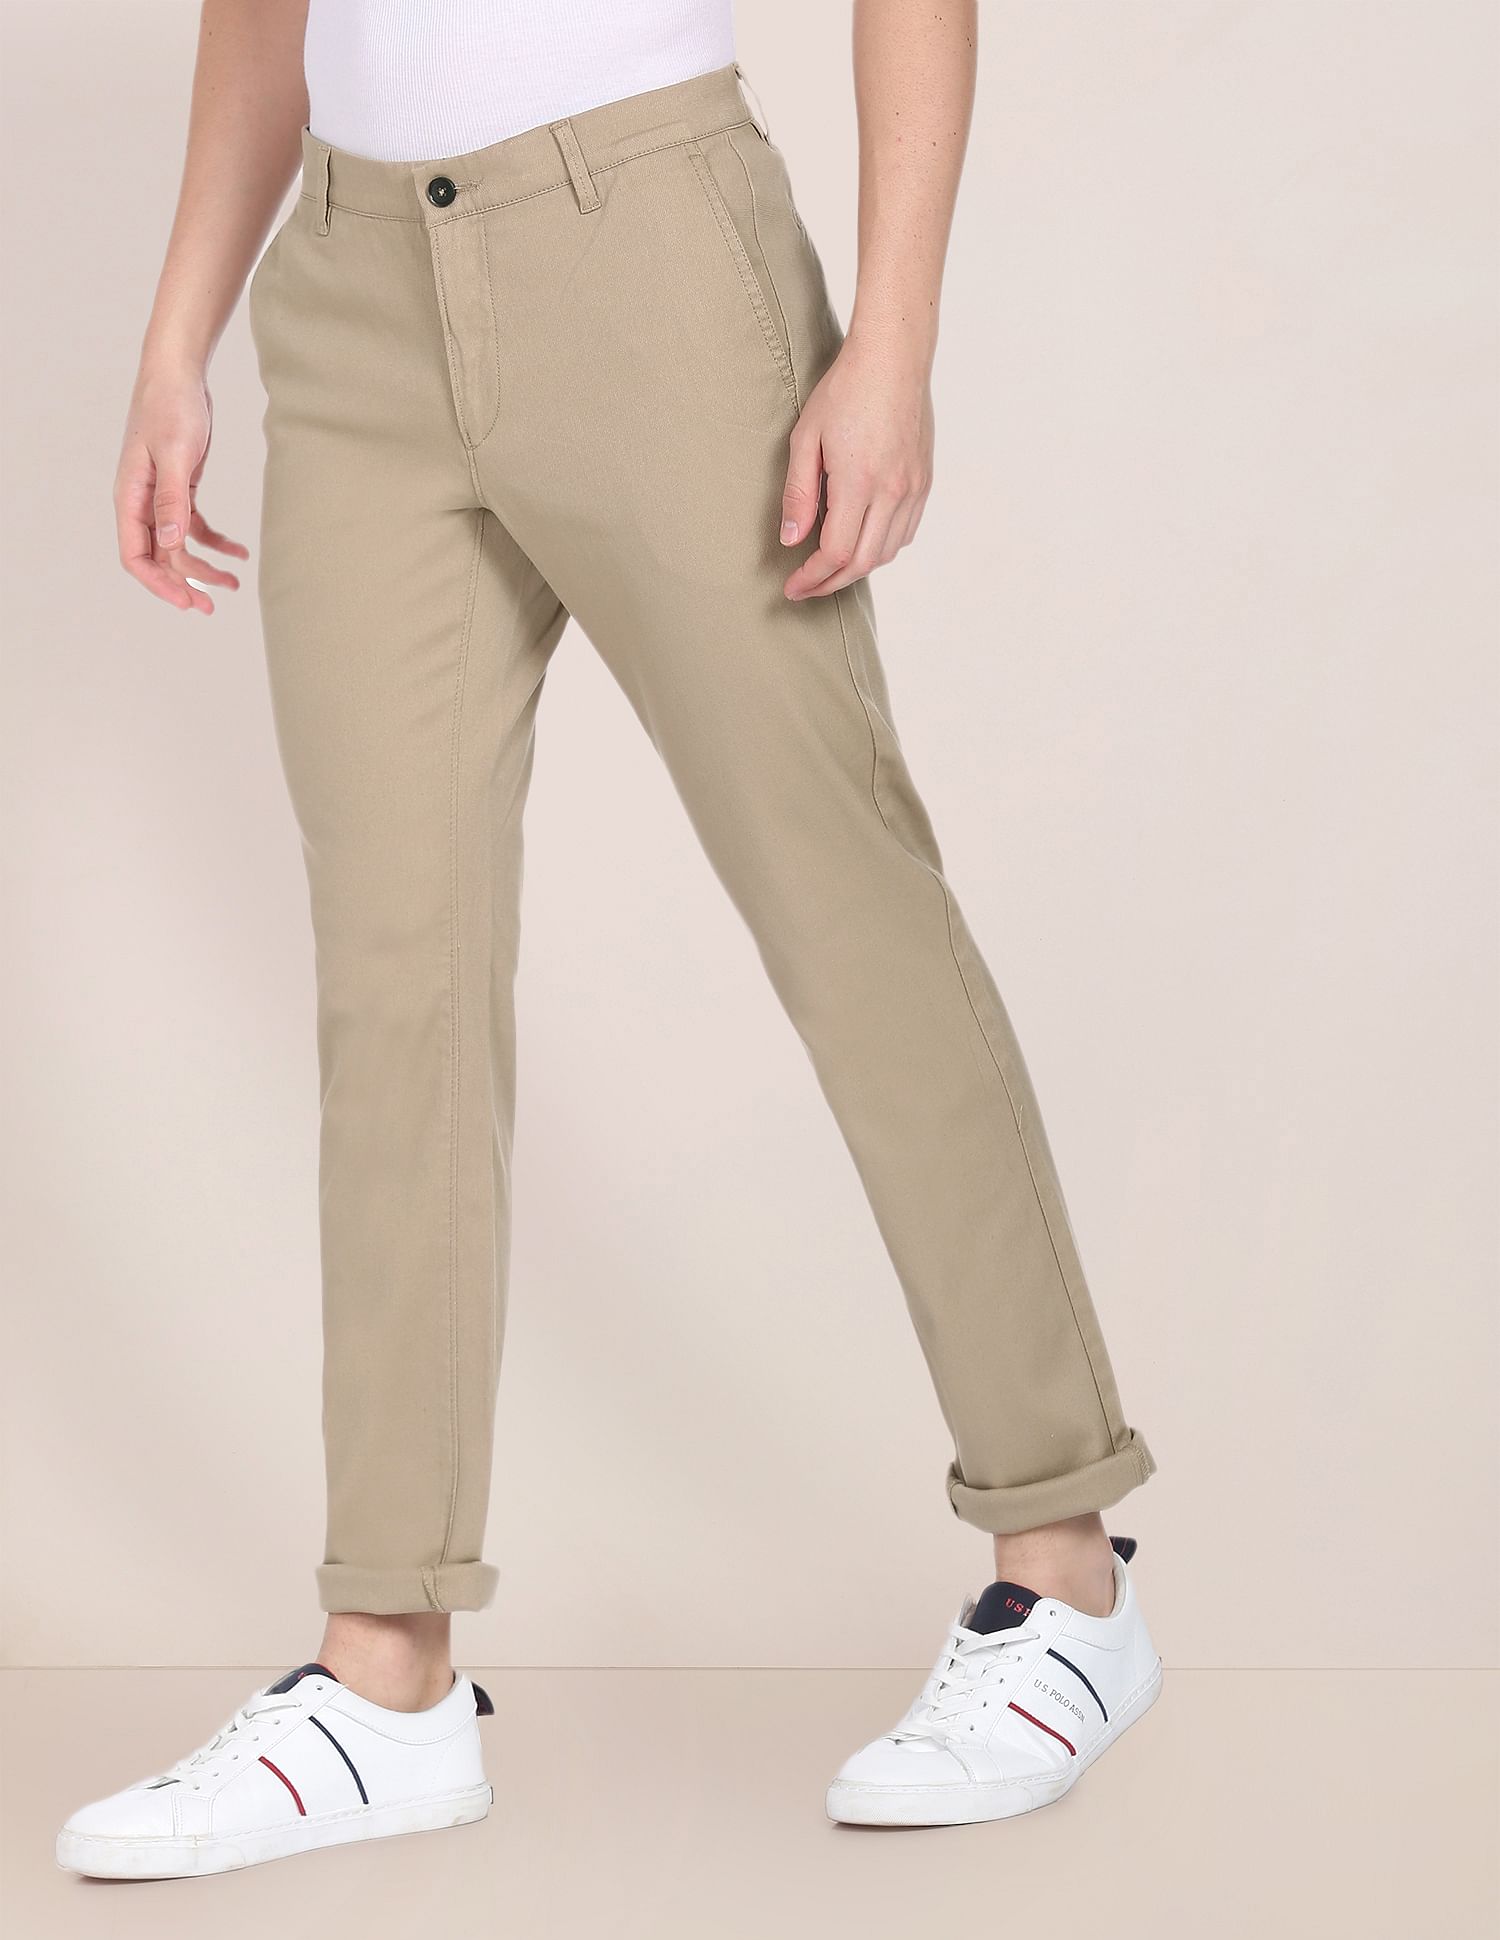 US POLO ASSN Casual Trousers  Buy US POLO ASSN Slim Fit Solid Casual  Trousers Online  Nykaa Fashion